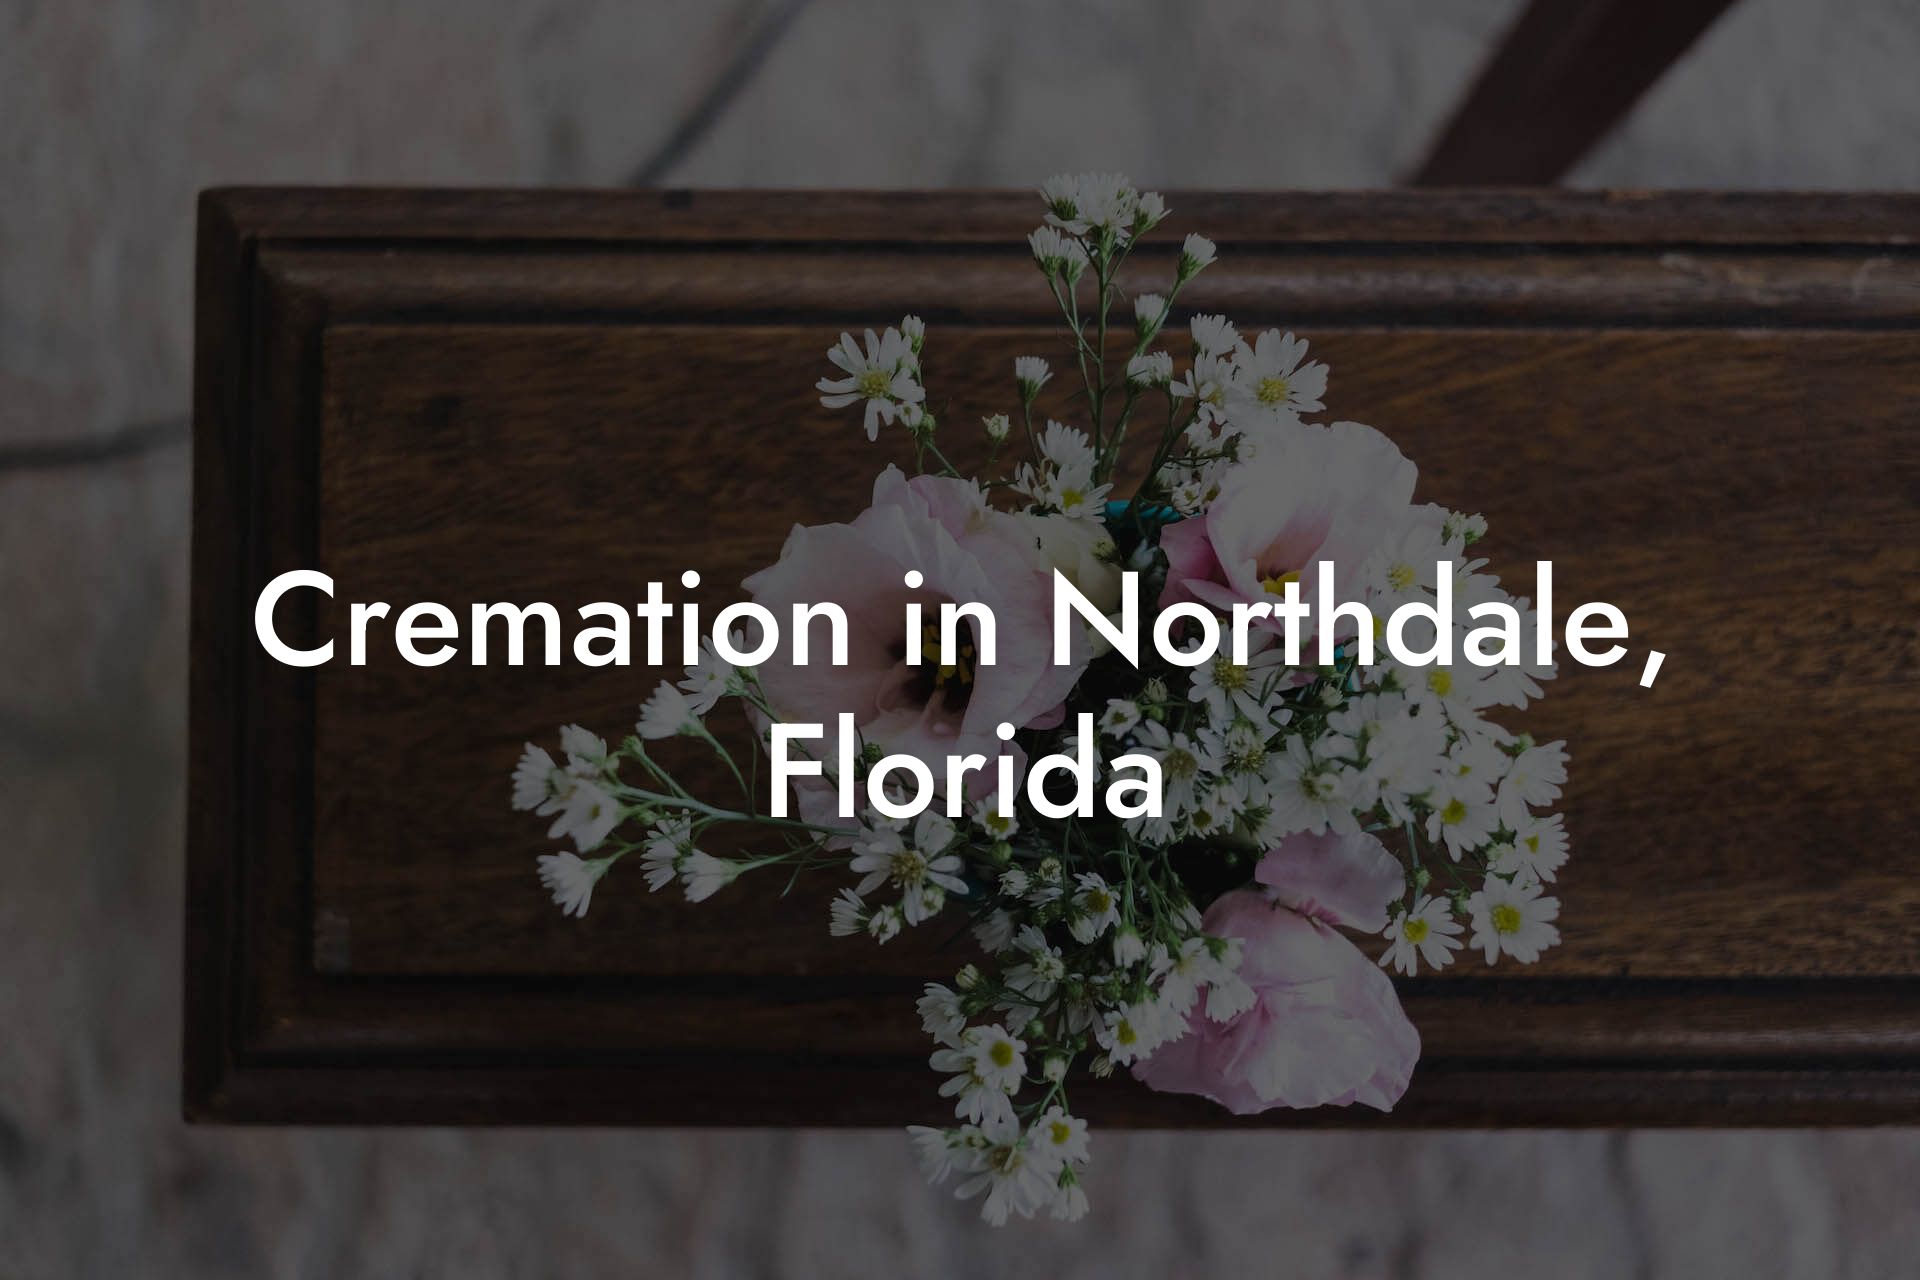 Cremation in Northdale, Florida